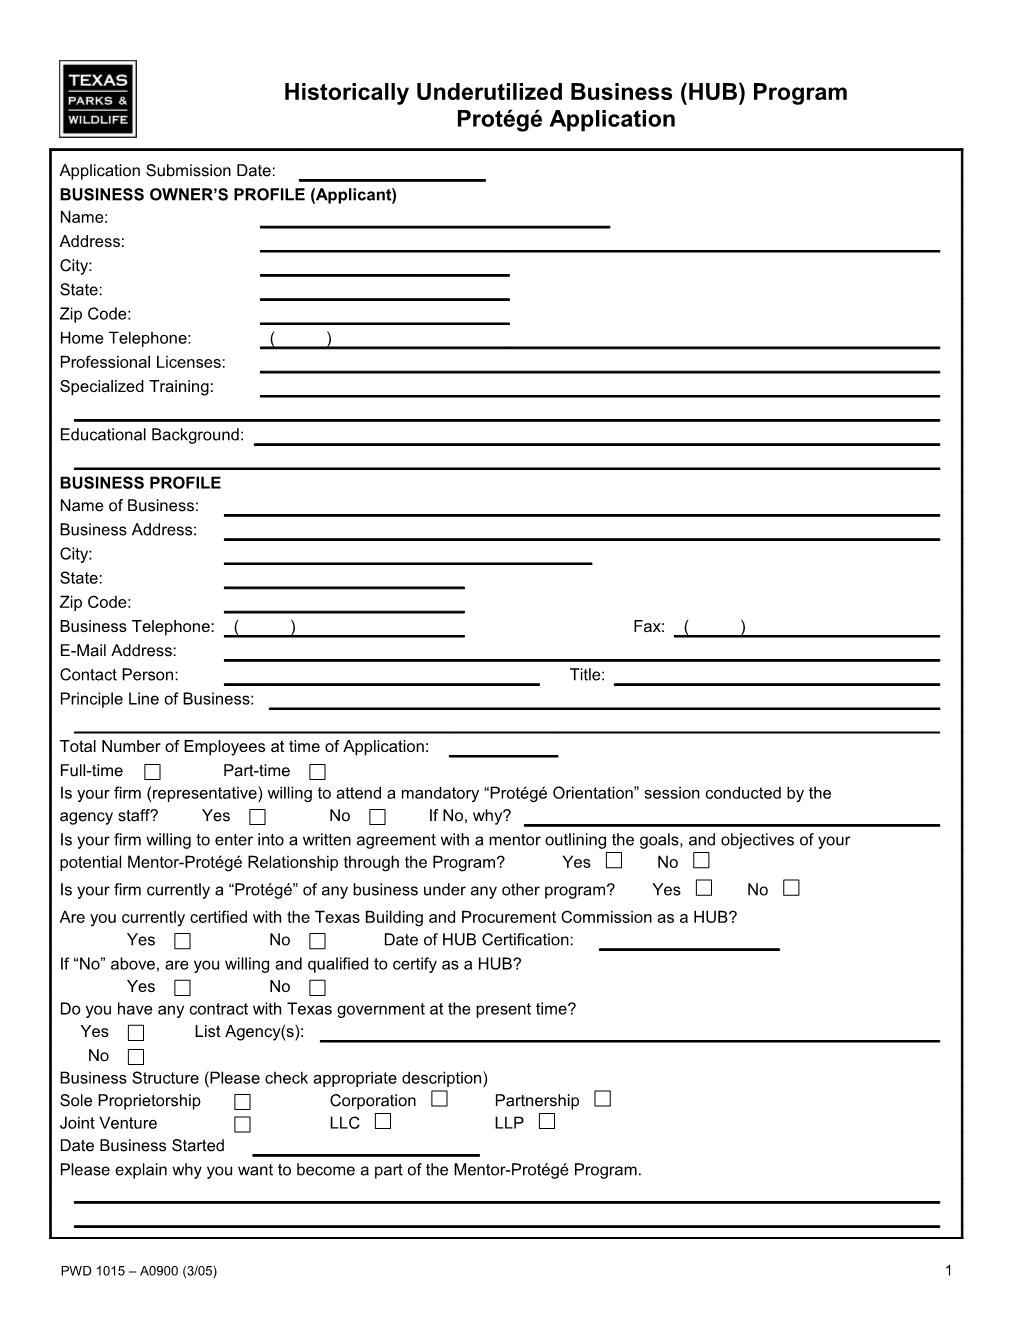 Texasparks and Wildlife Department Maintains the Information Collected Through This Form